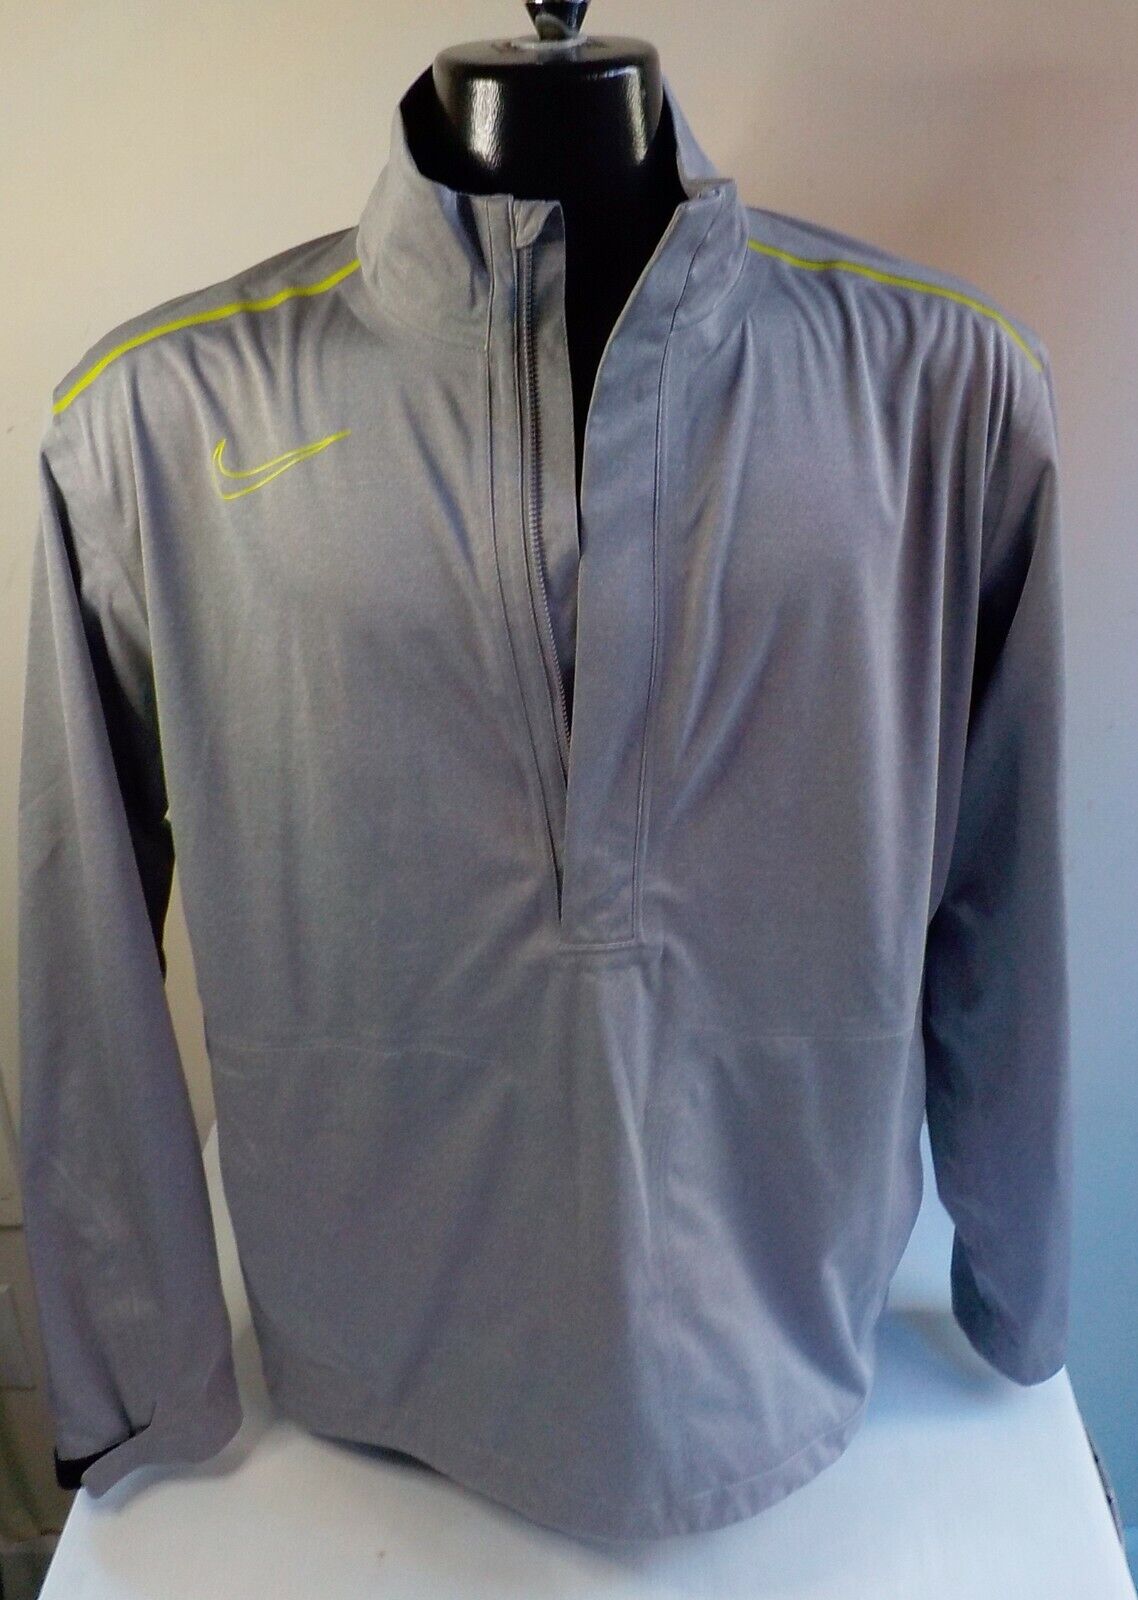 NIKE GOLF Storm-Fit 1 4 Zip Pullover Gre Windbreaker Beauty products Gray Jacket Popular brand in the world